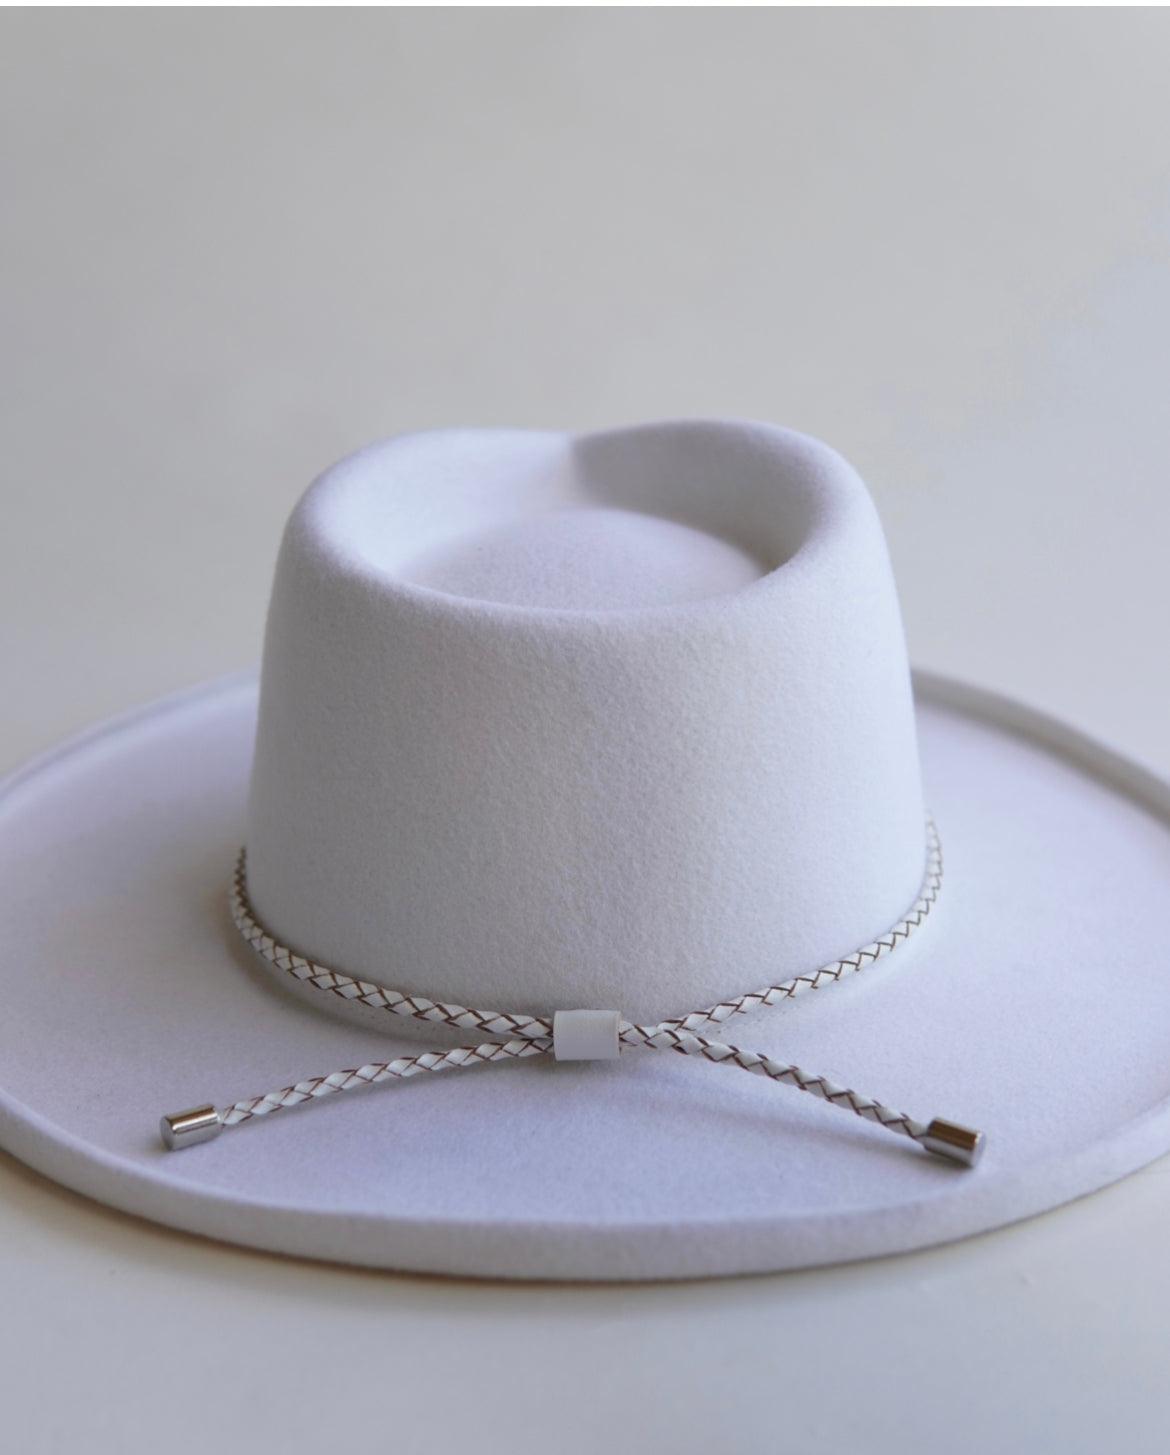 cowboy hat band  Augustine hat band - braided leather hat band, hat accessory 